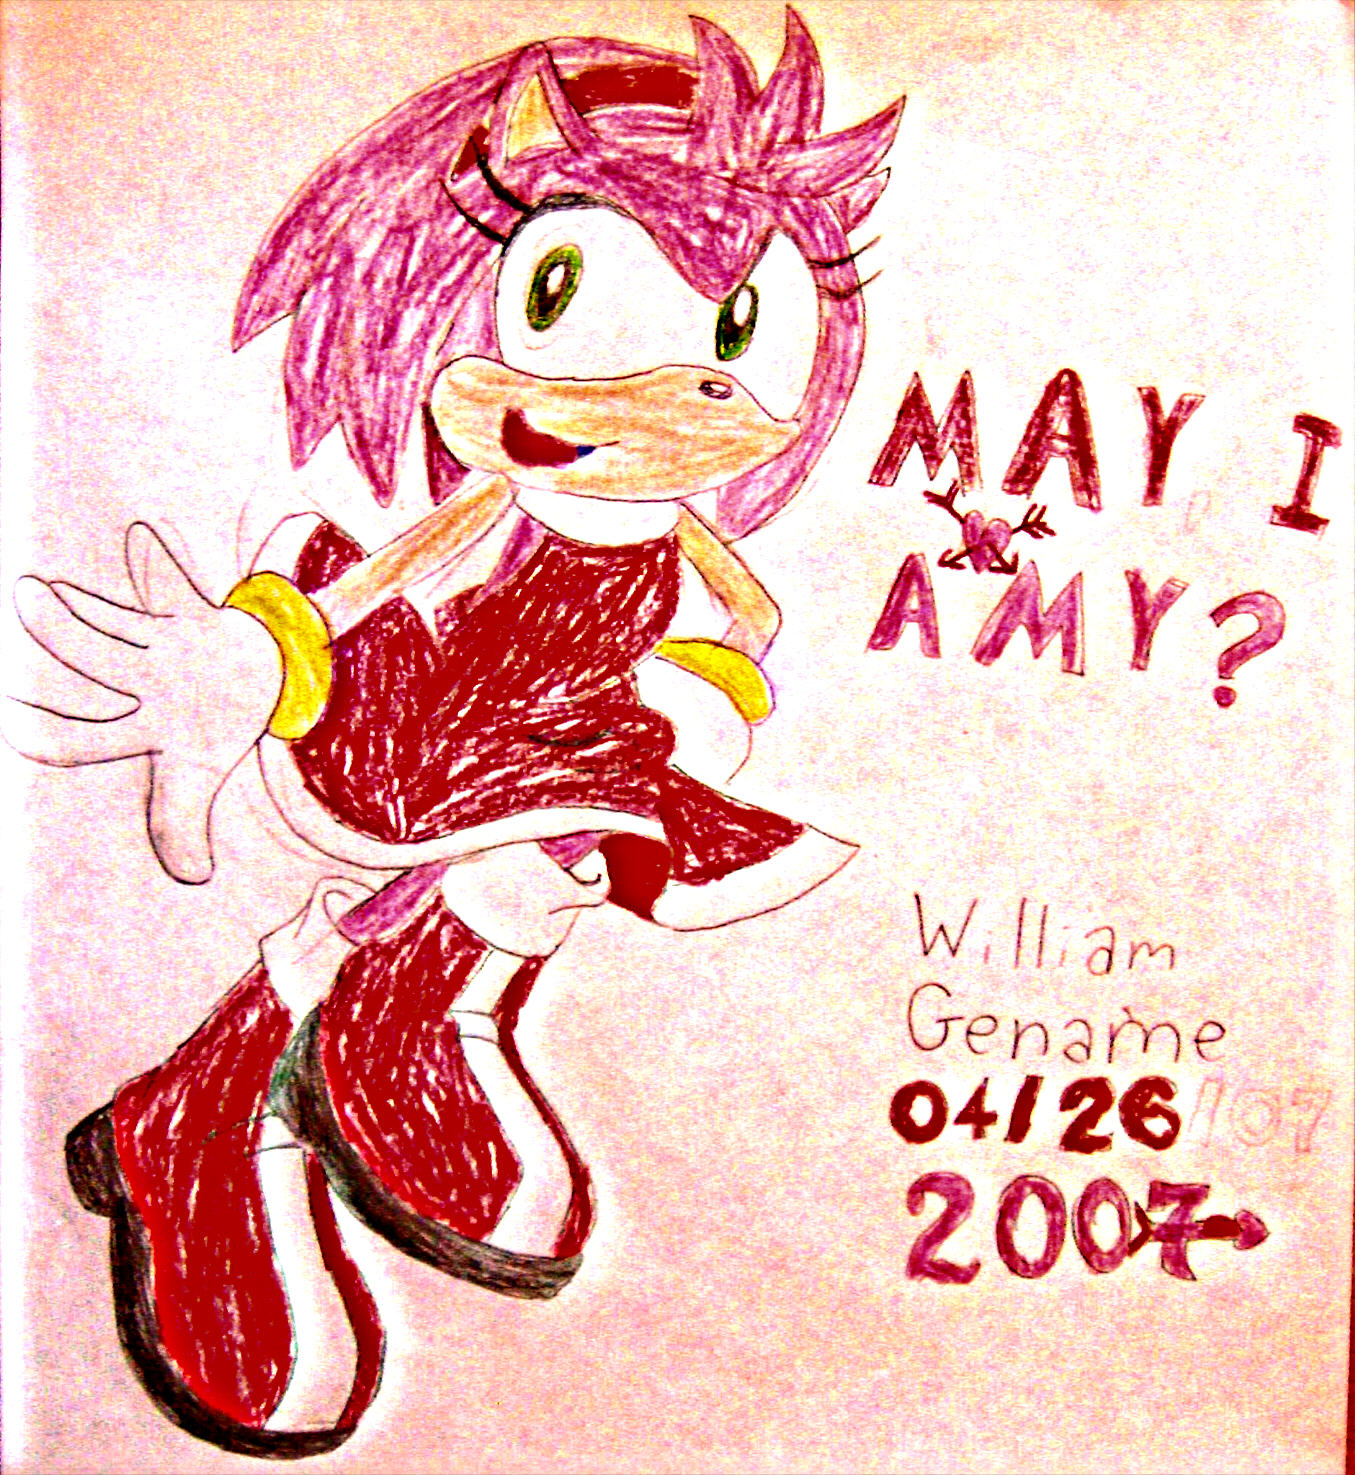 May I Amy? by germanname